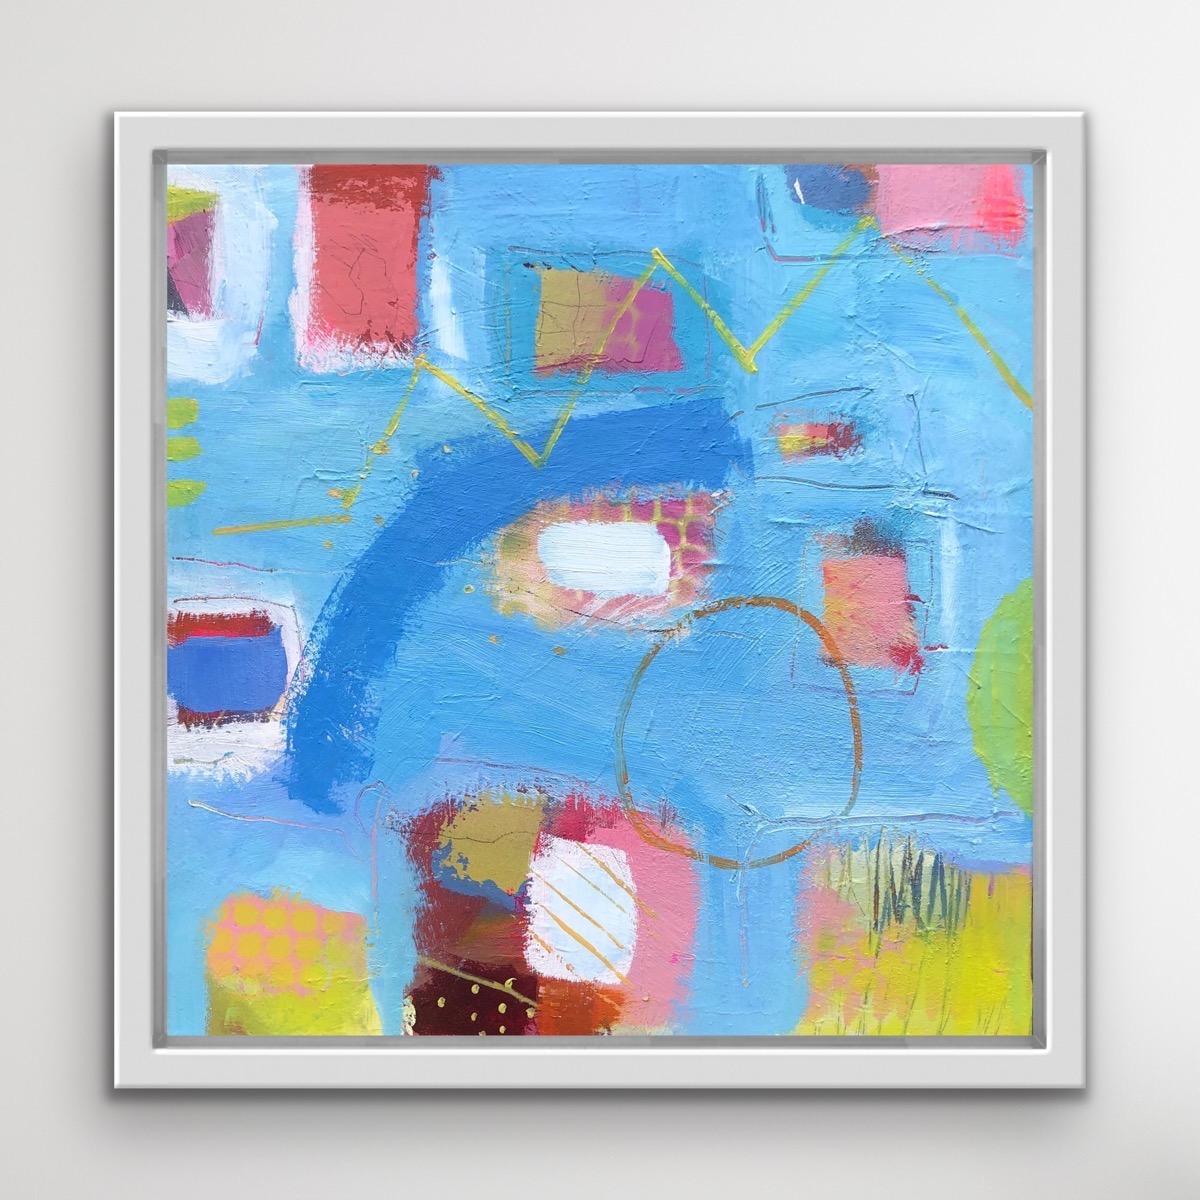 Montana Melody 2, Bright Mixed Media Contemporary Abstract Art, Original art - Blue Abstract Painting by Maggie LaPorte Banks